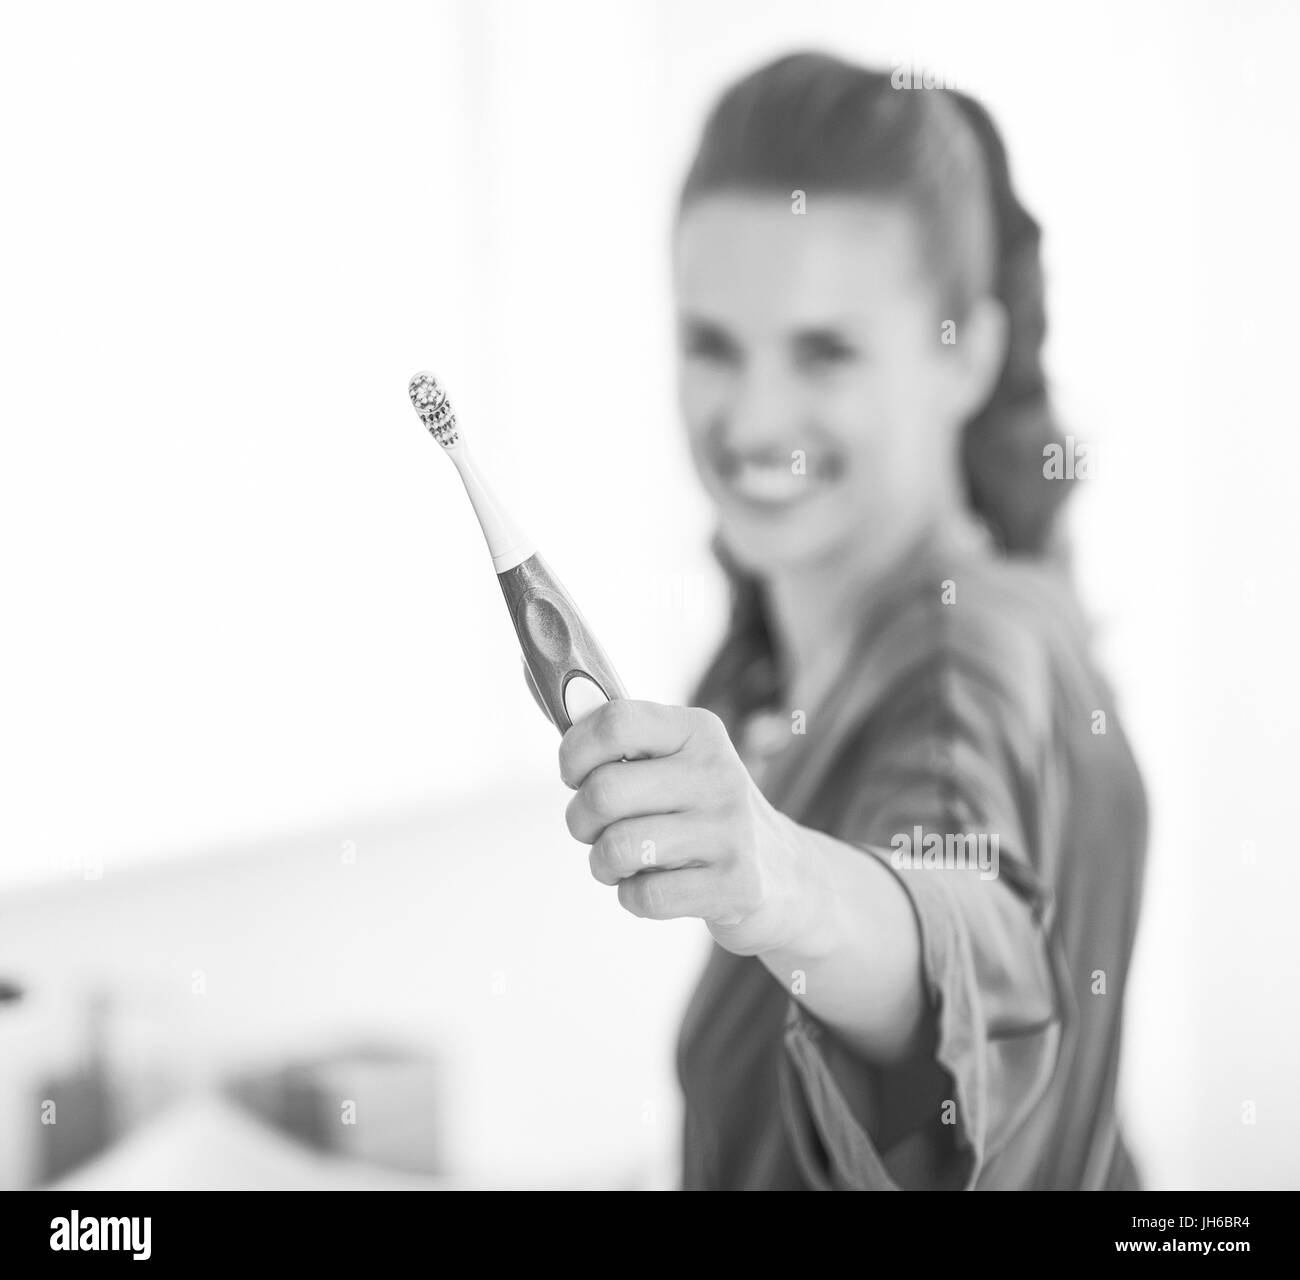 Closeup on toothbrush in hand of young woman Stock Photo